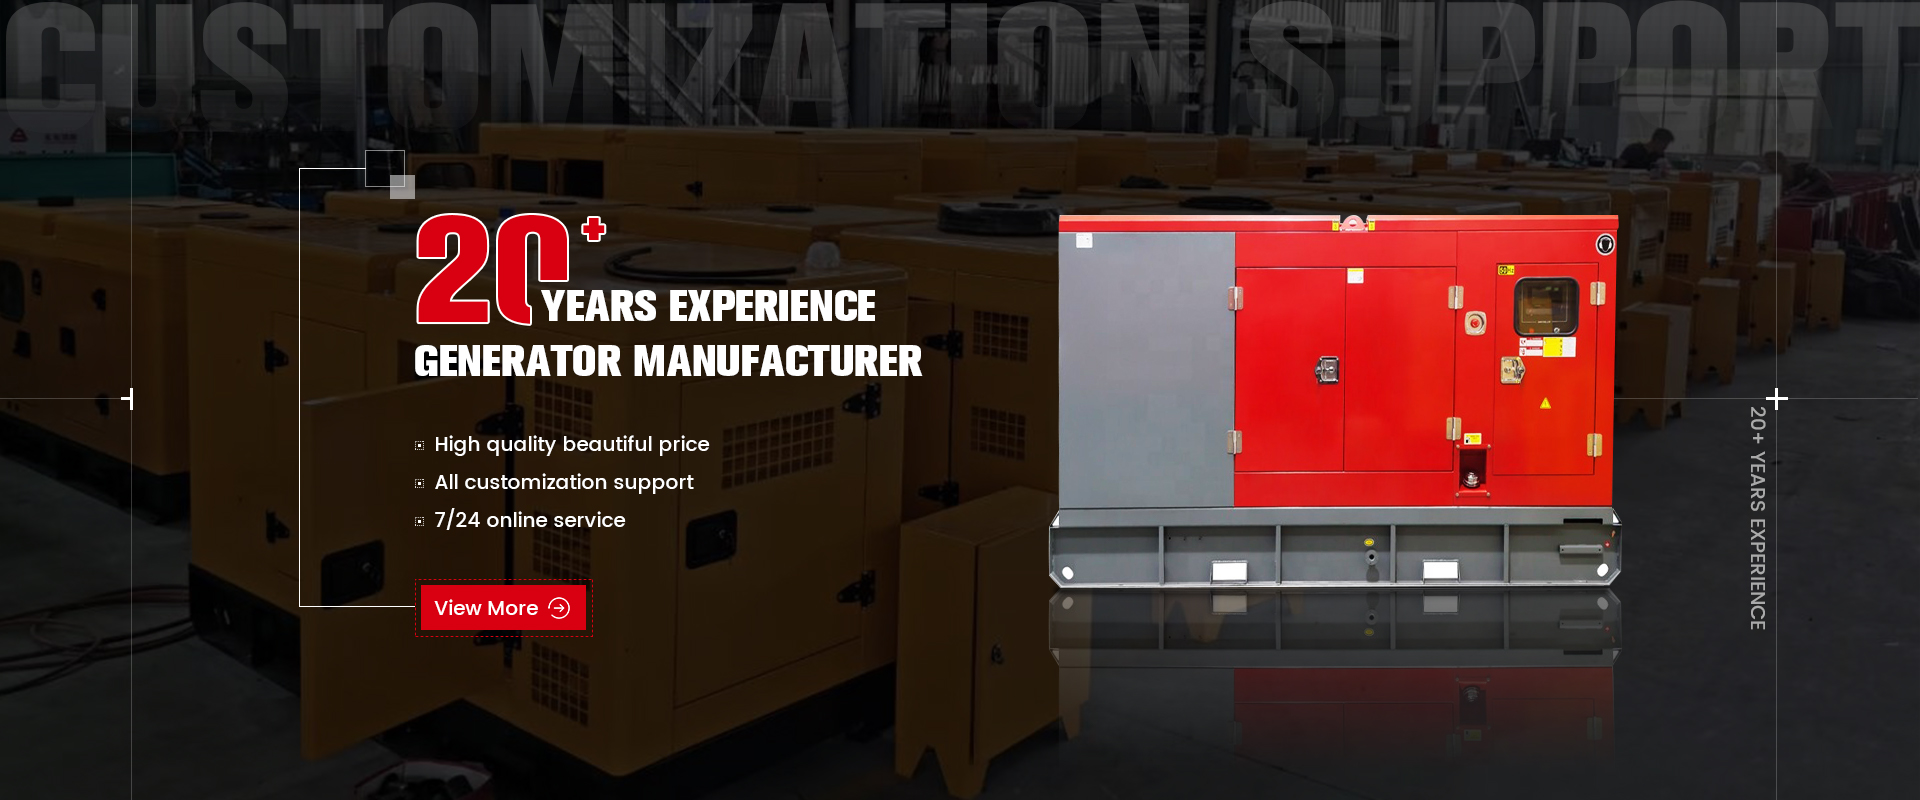 20+ years experience generator manufacturer